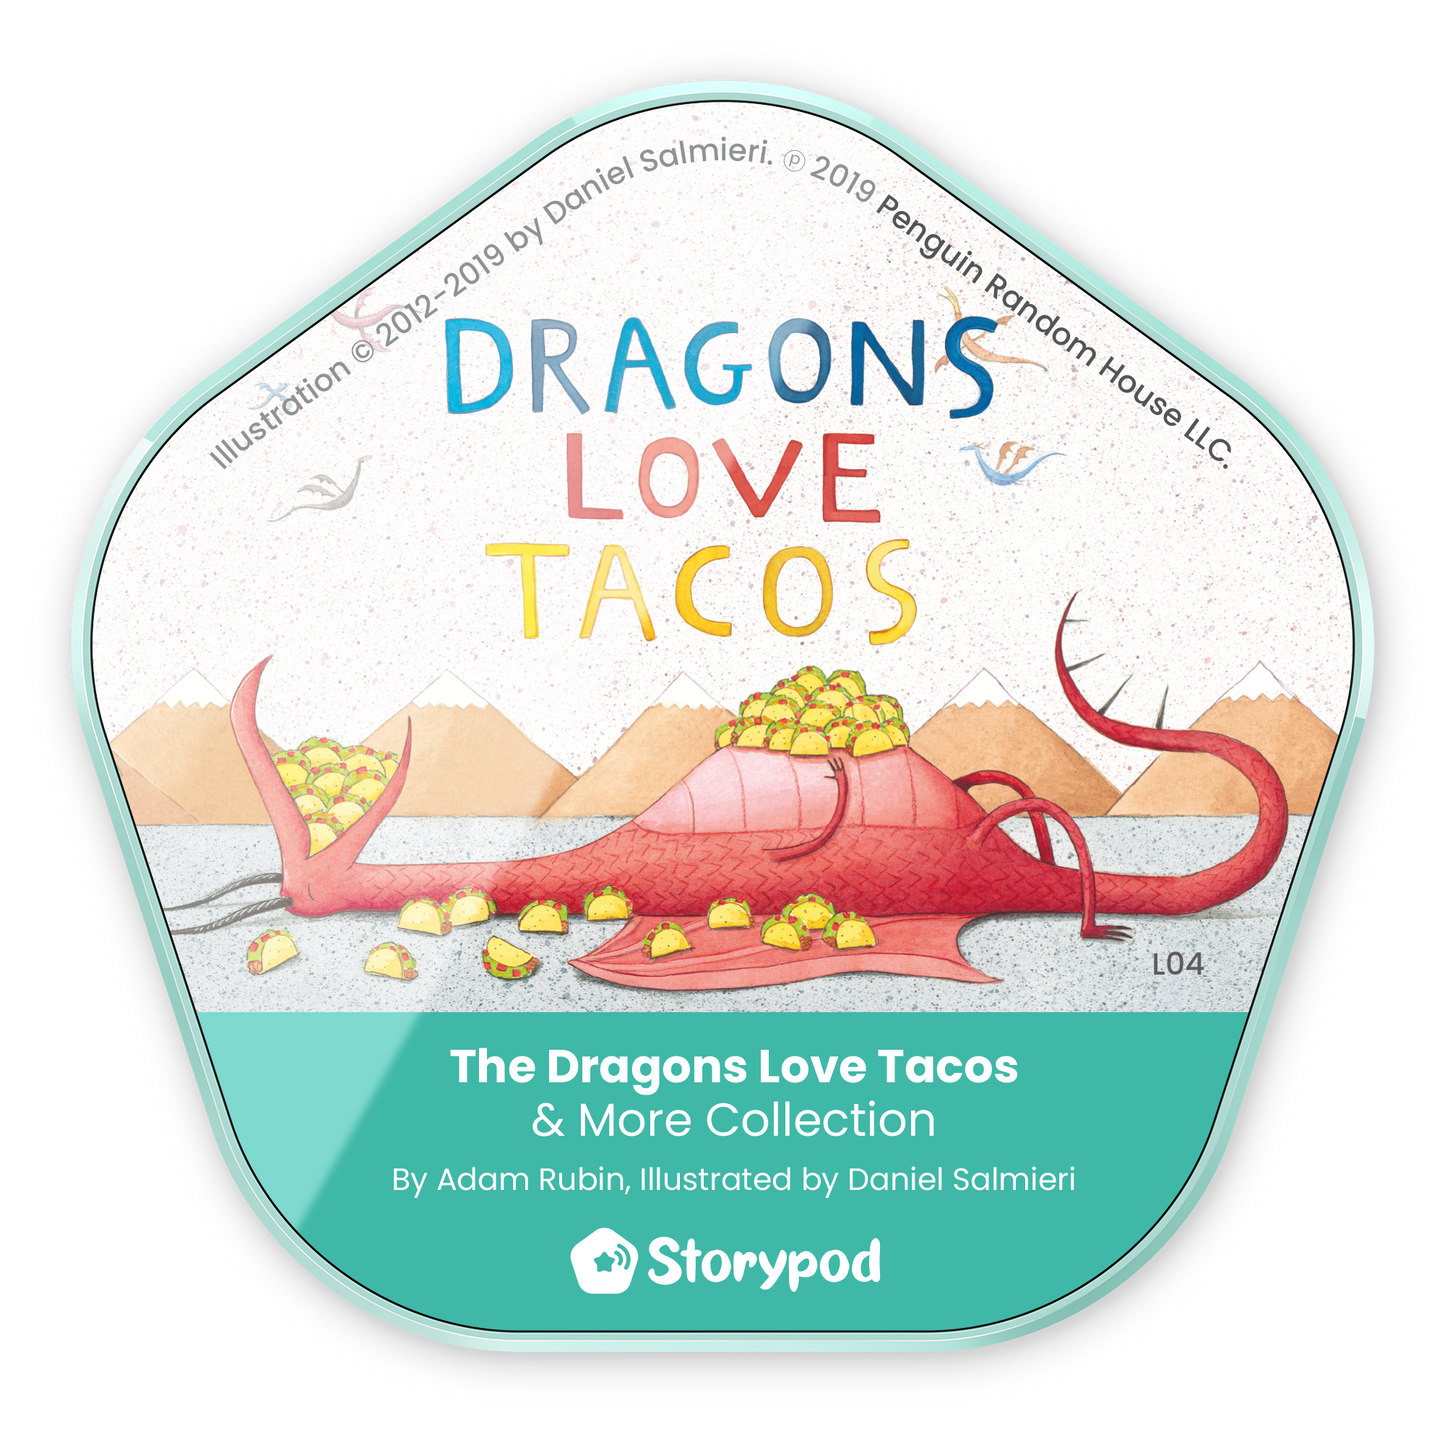 The Dragons Love Tacos & More Collection